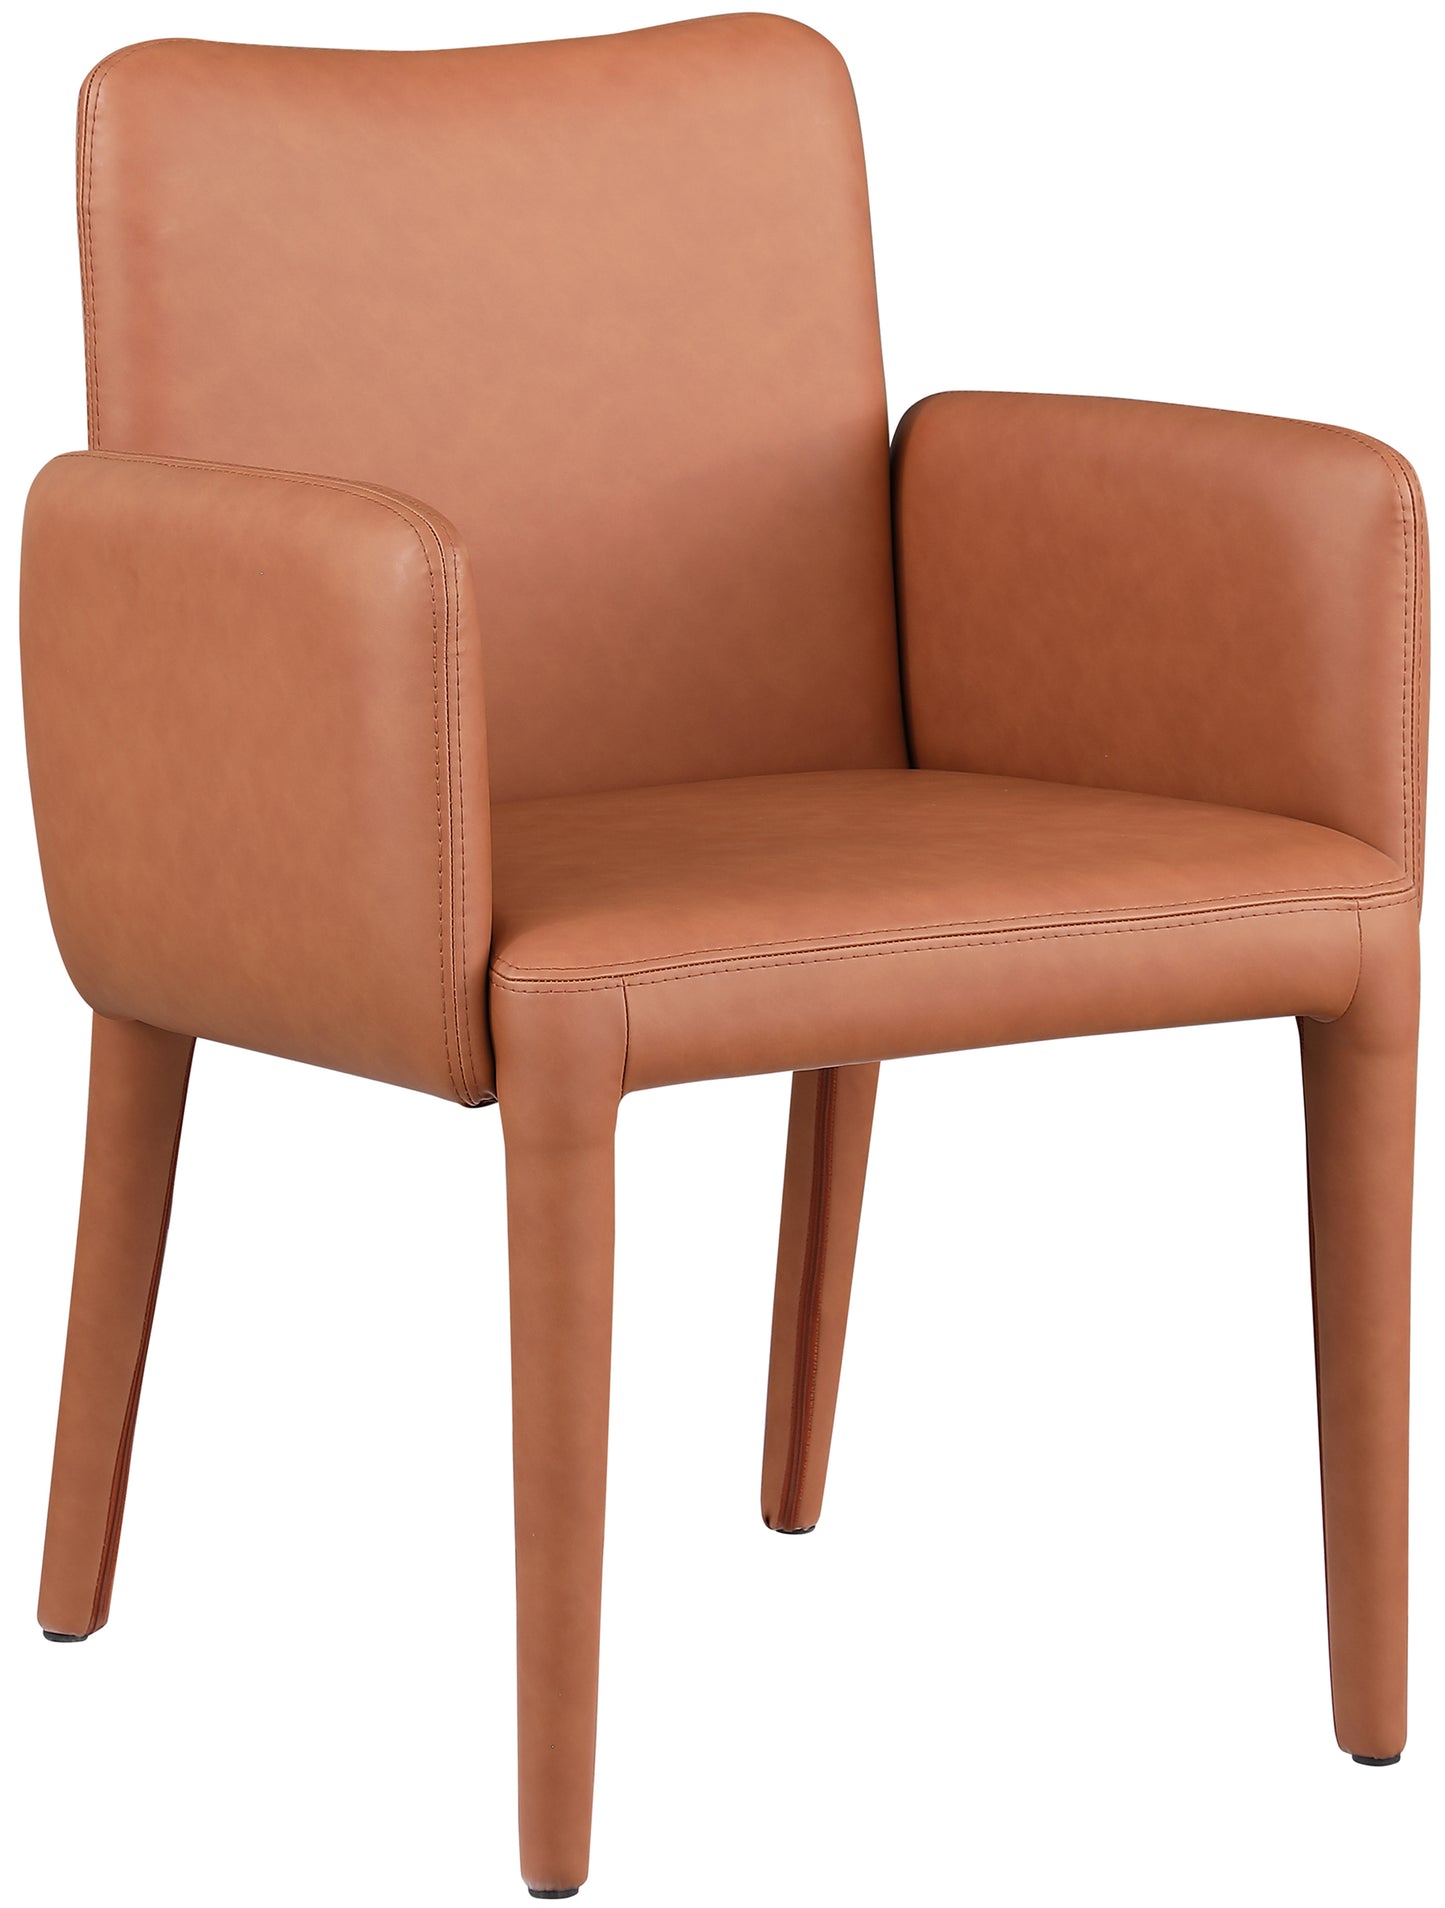 accent/dining chair